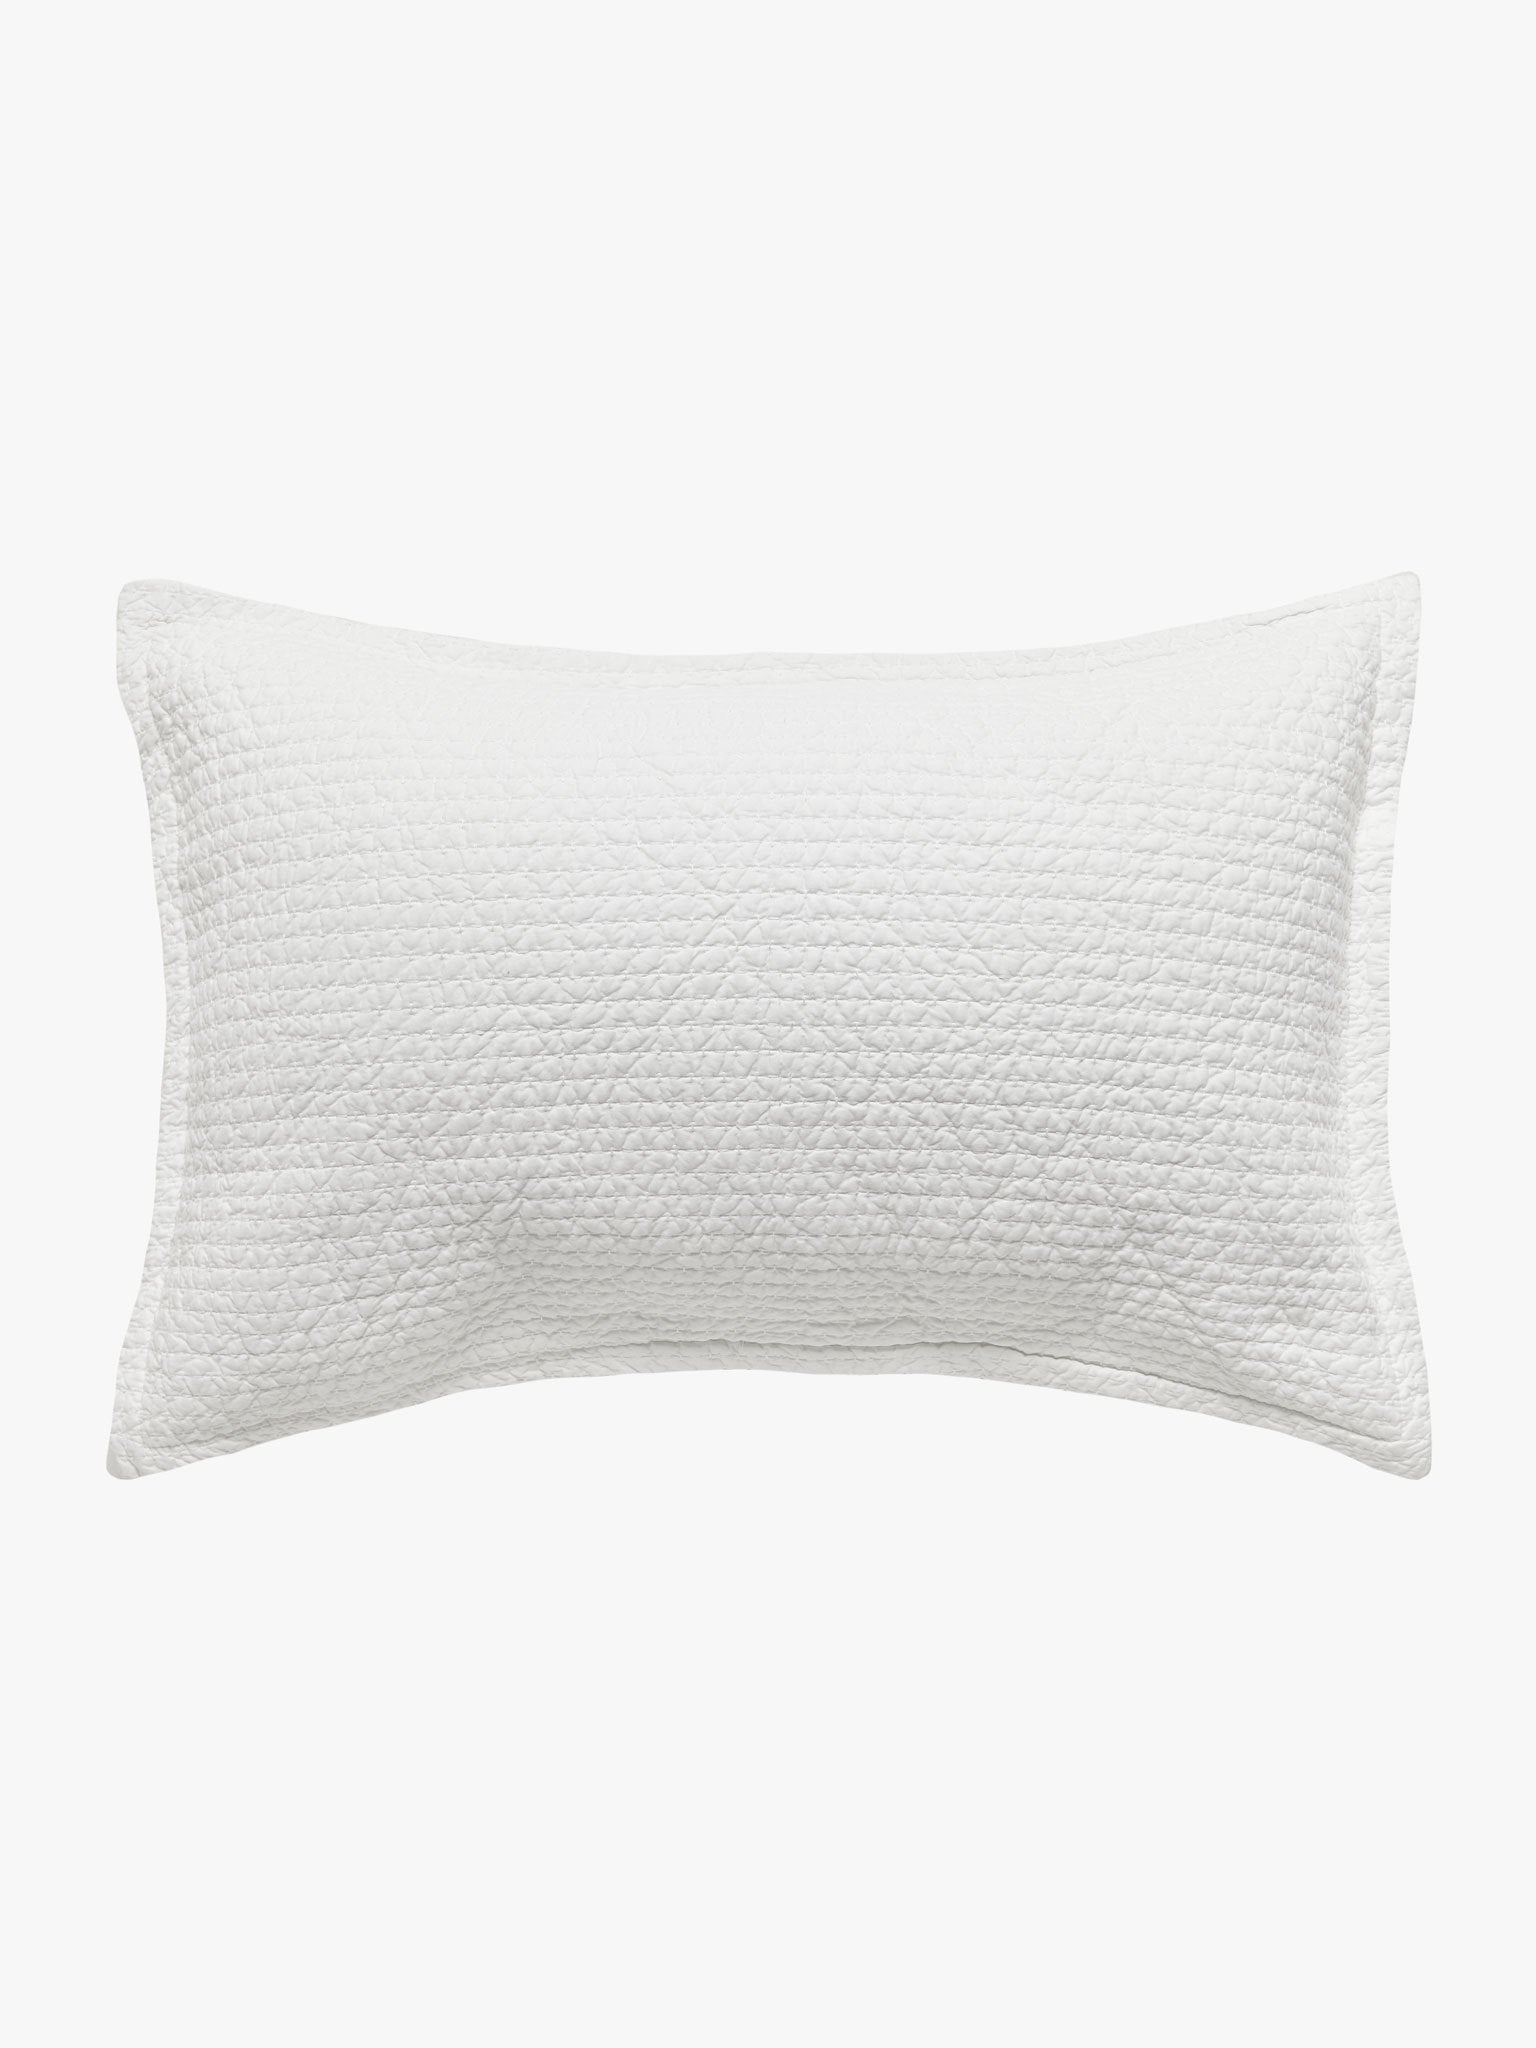 Aspen White Quilted Pillowcases Quilted Pillowcase L&M Home Standard Pillowcase 